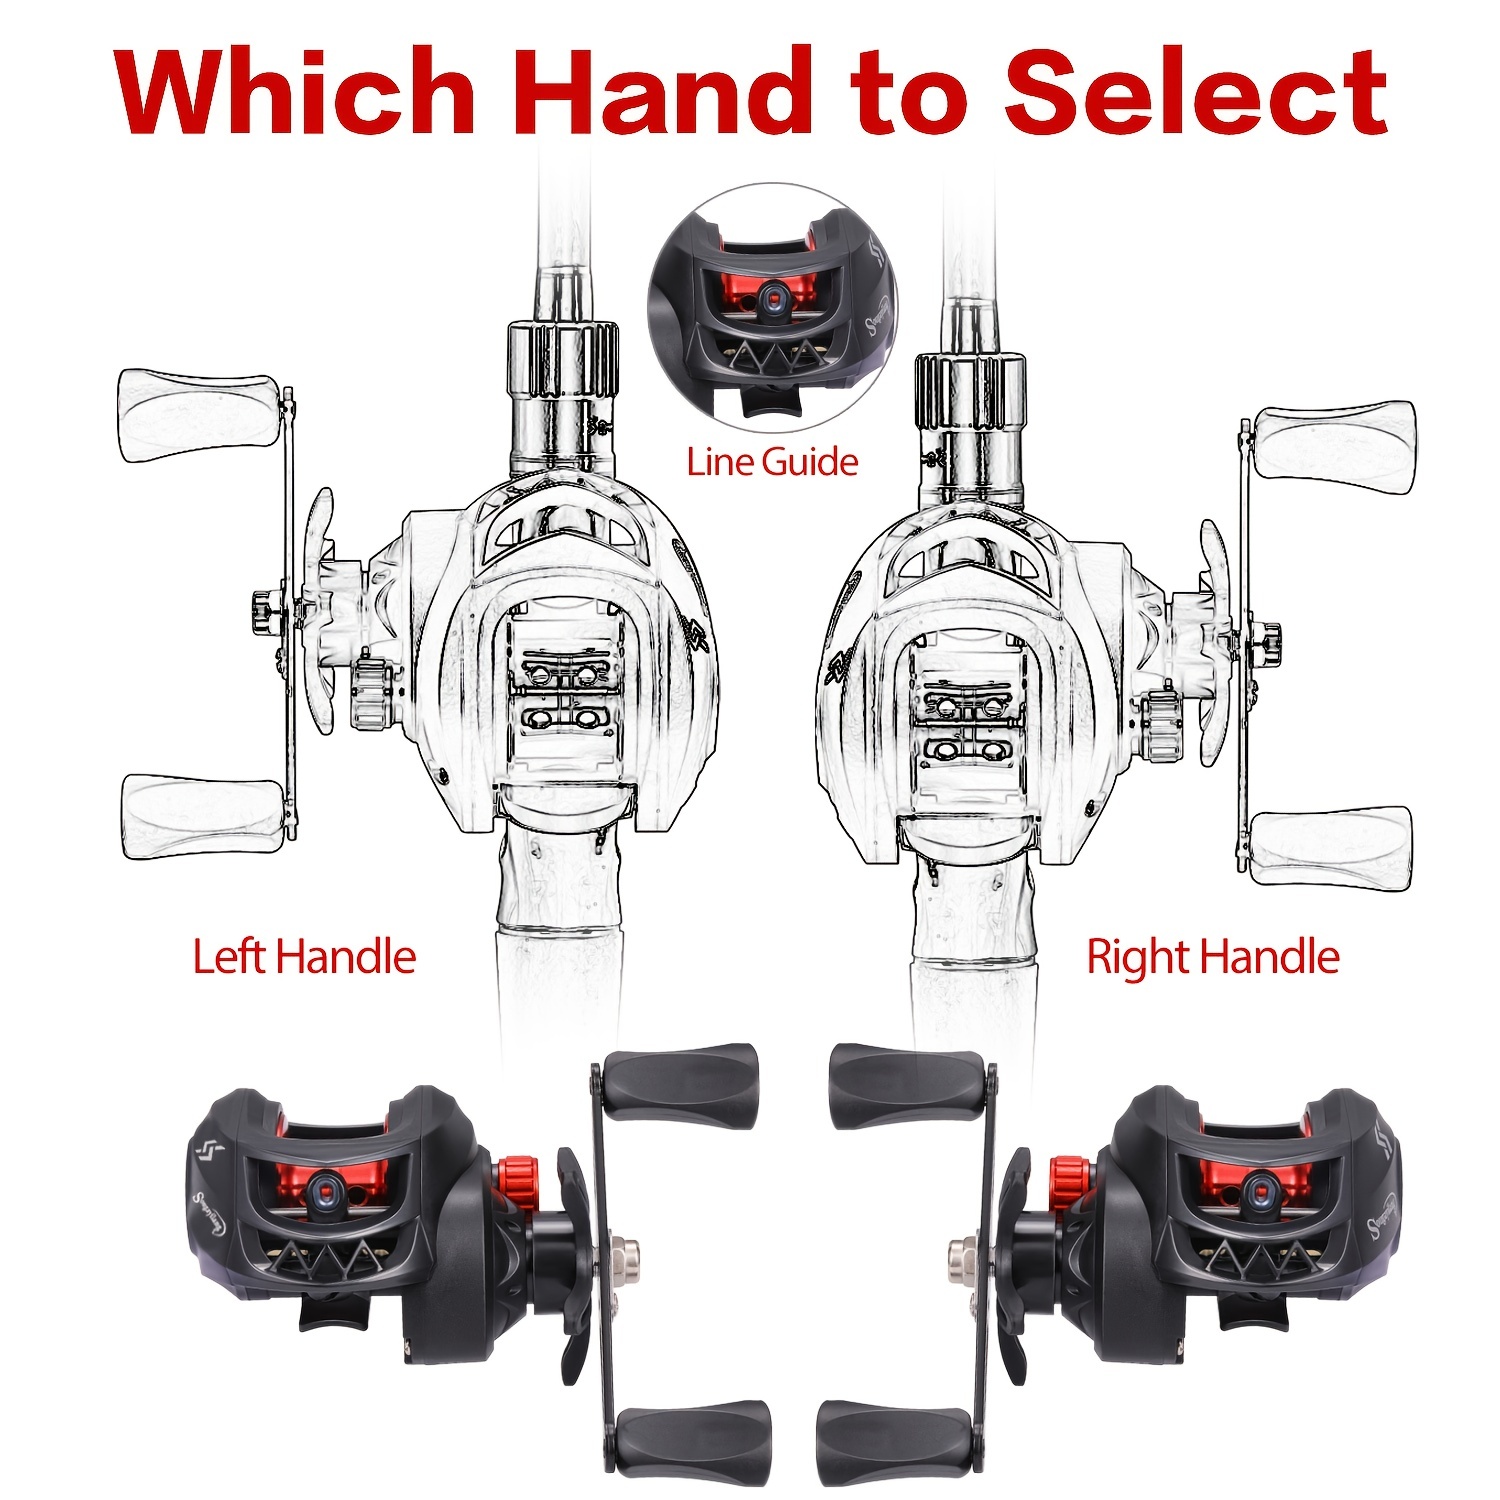 How to operate the baitcasting reel is not easy to blow up the line, j –  Sougayilang